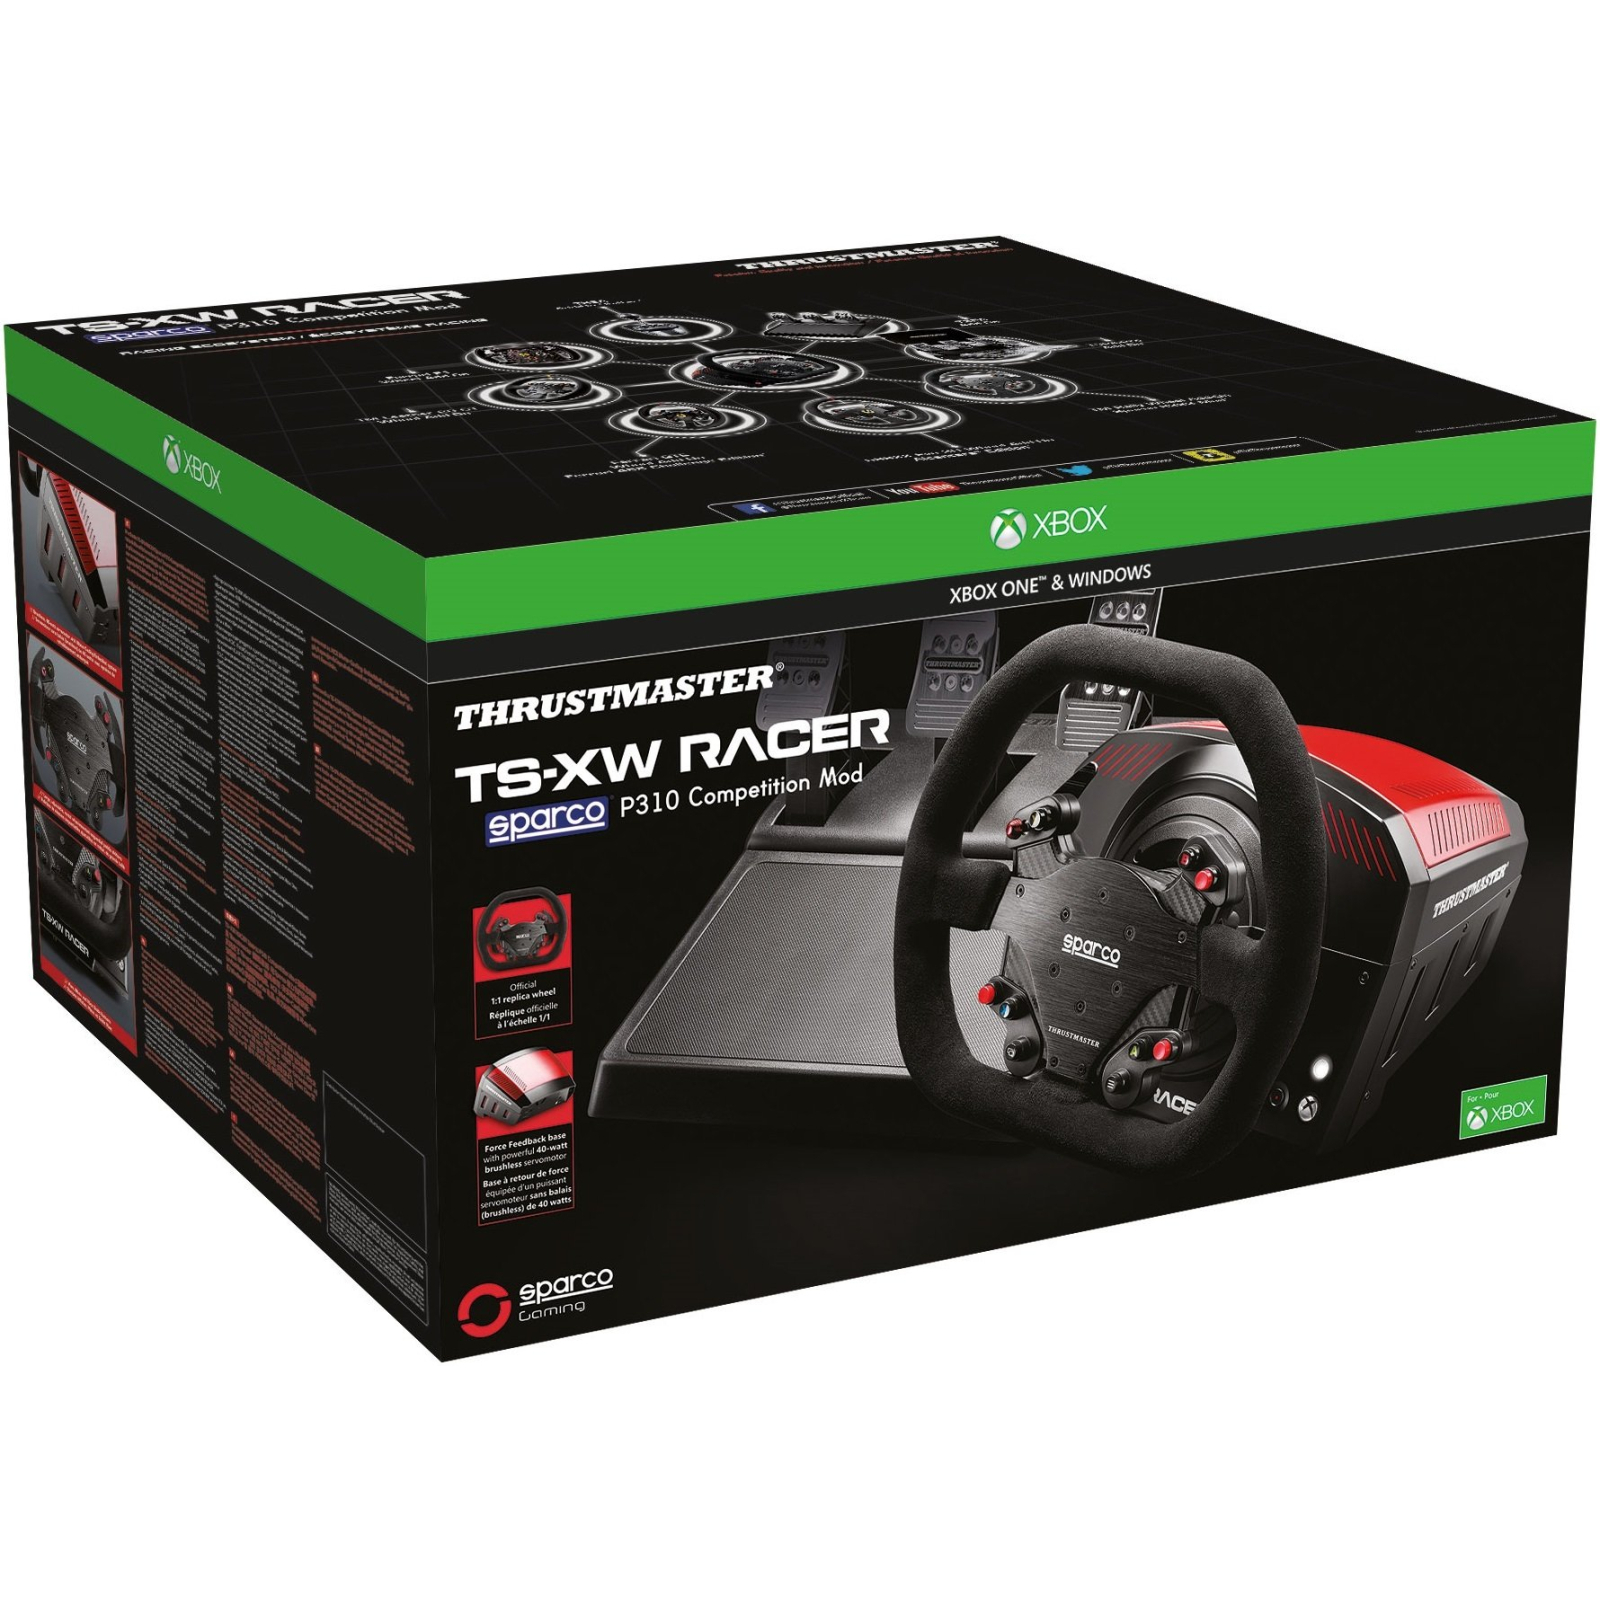 Руль ThrustMaster TS-XW Racer Sparco P310 Competition Mod PC/Xbox One Black (4460157) изображение 8